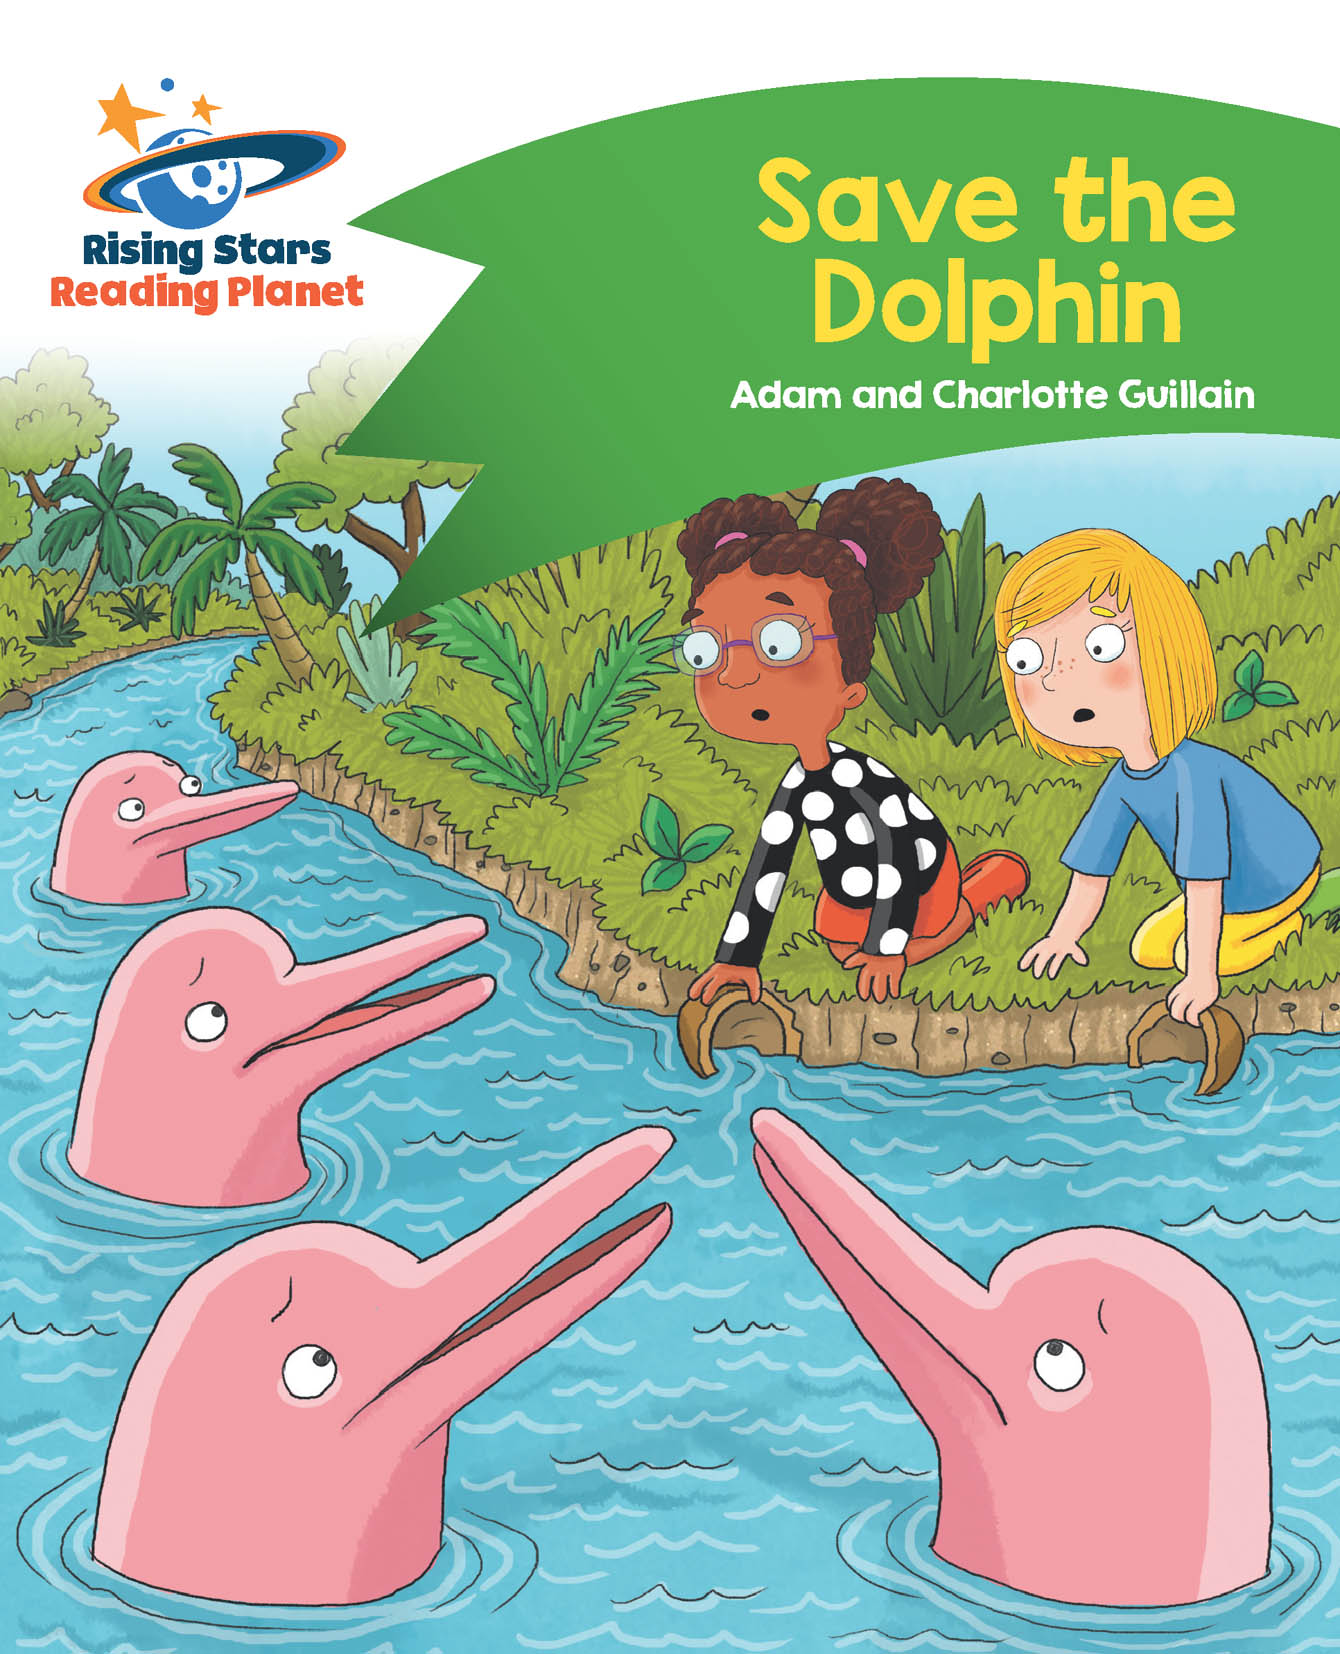 Save the dolphin